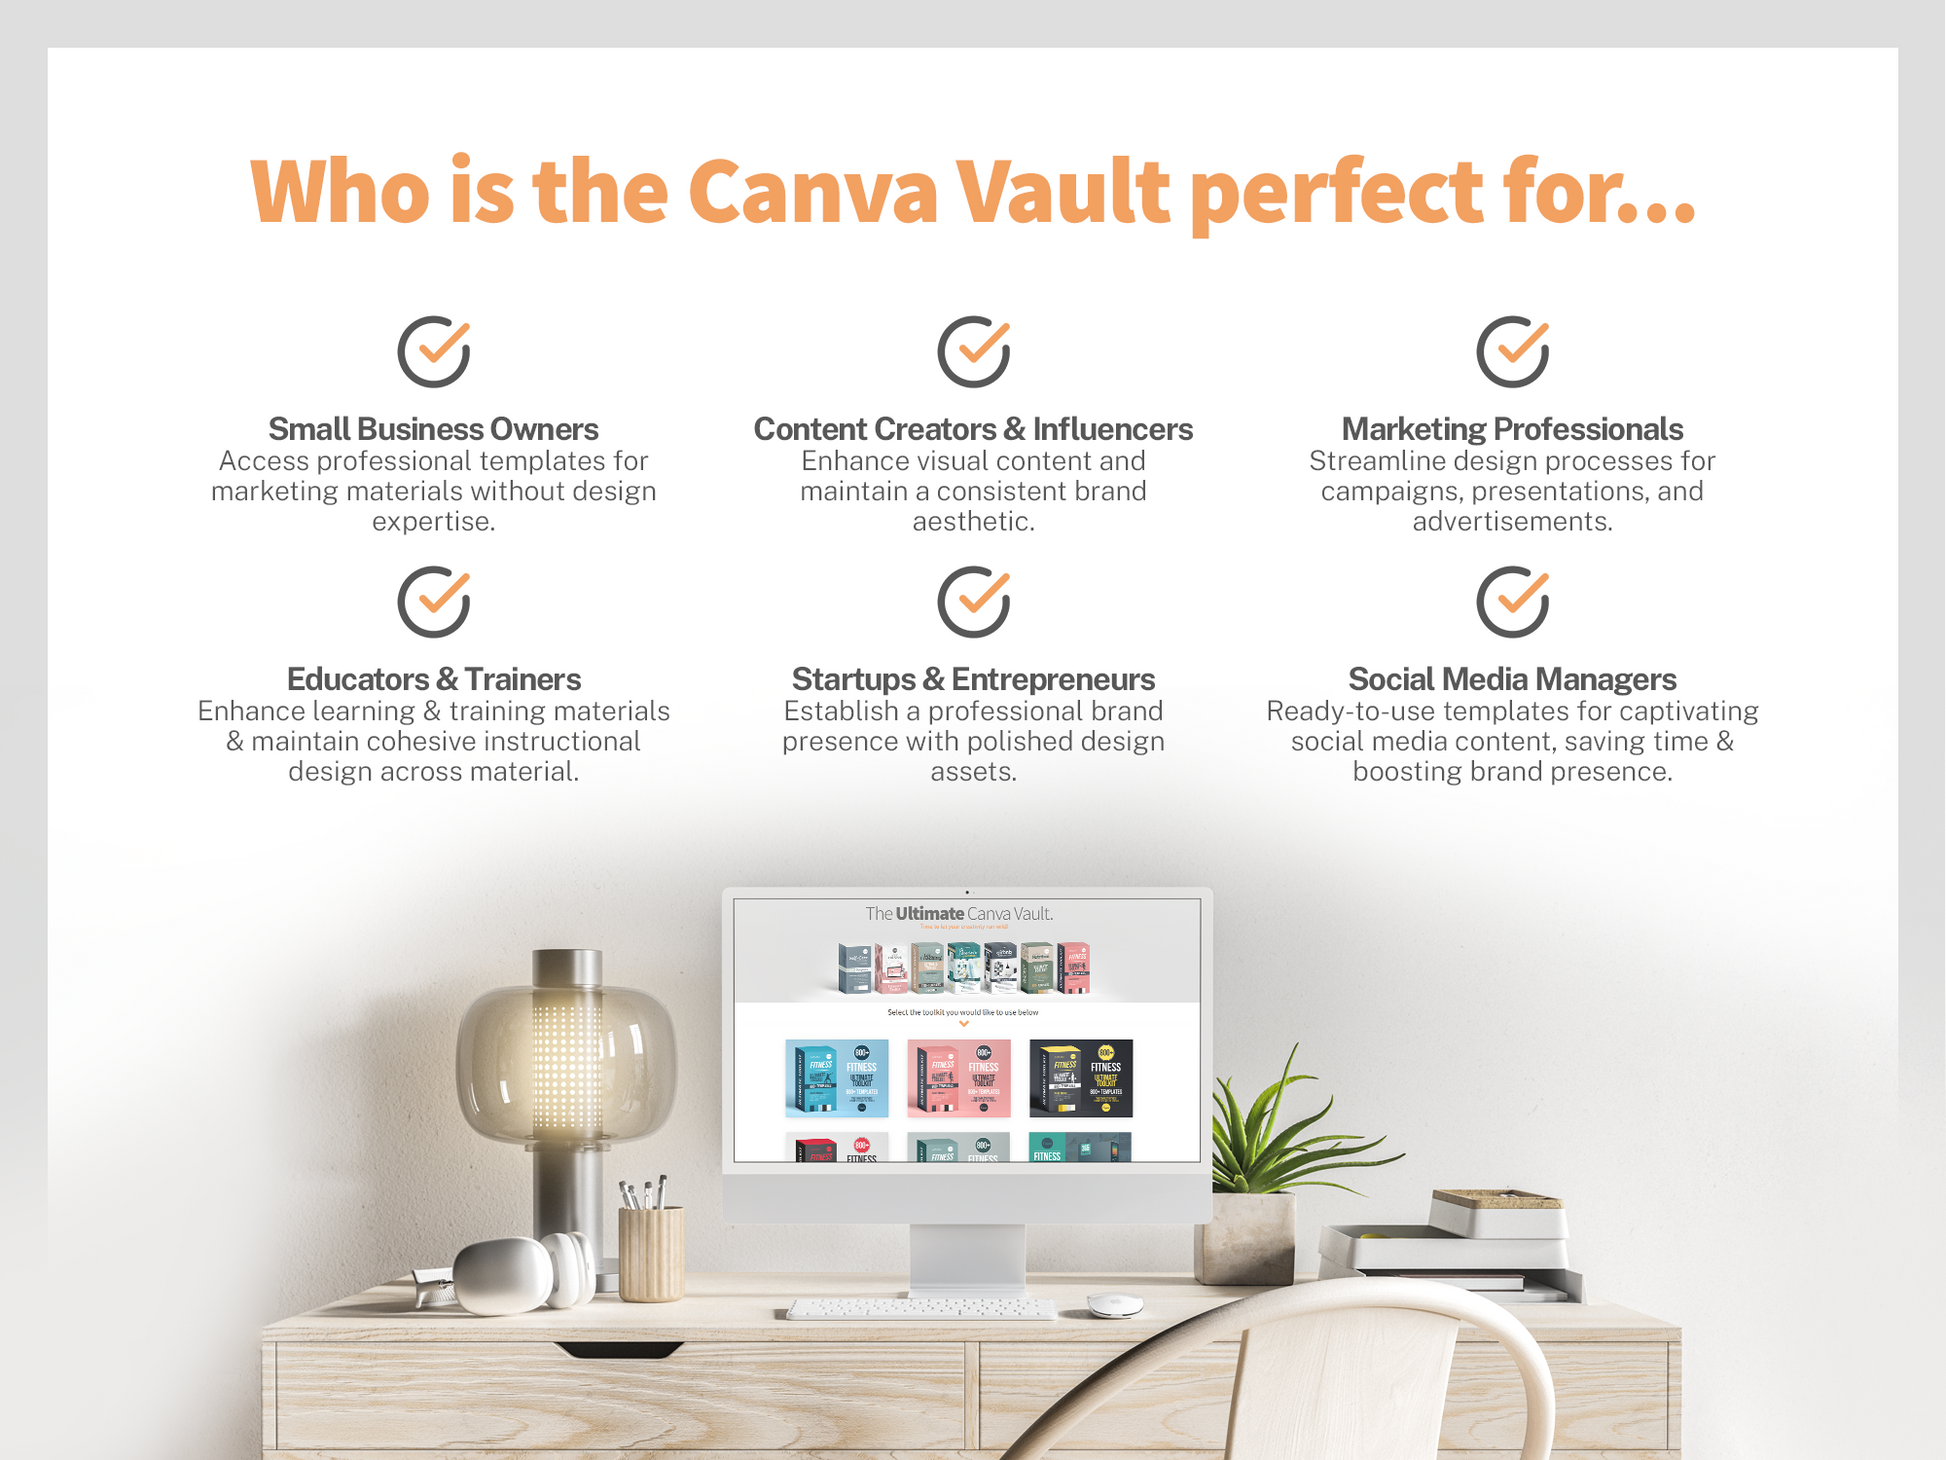 6 Incredible Benefits of Using Canva That You May Not Know About - Small  Business Marketing Tools